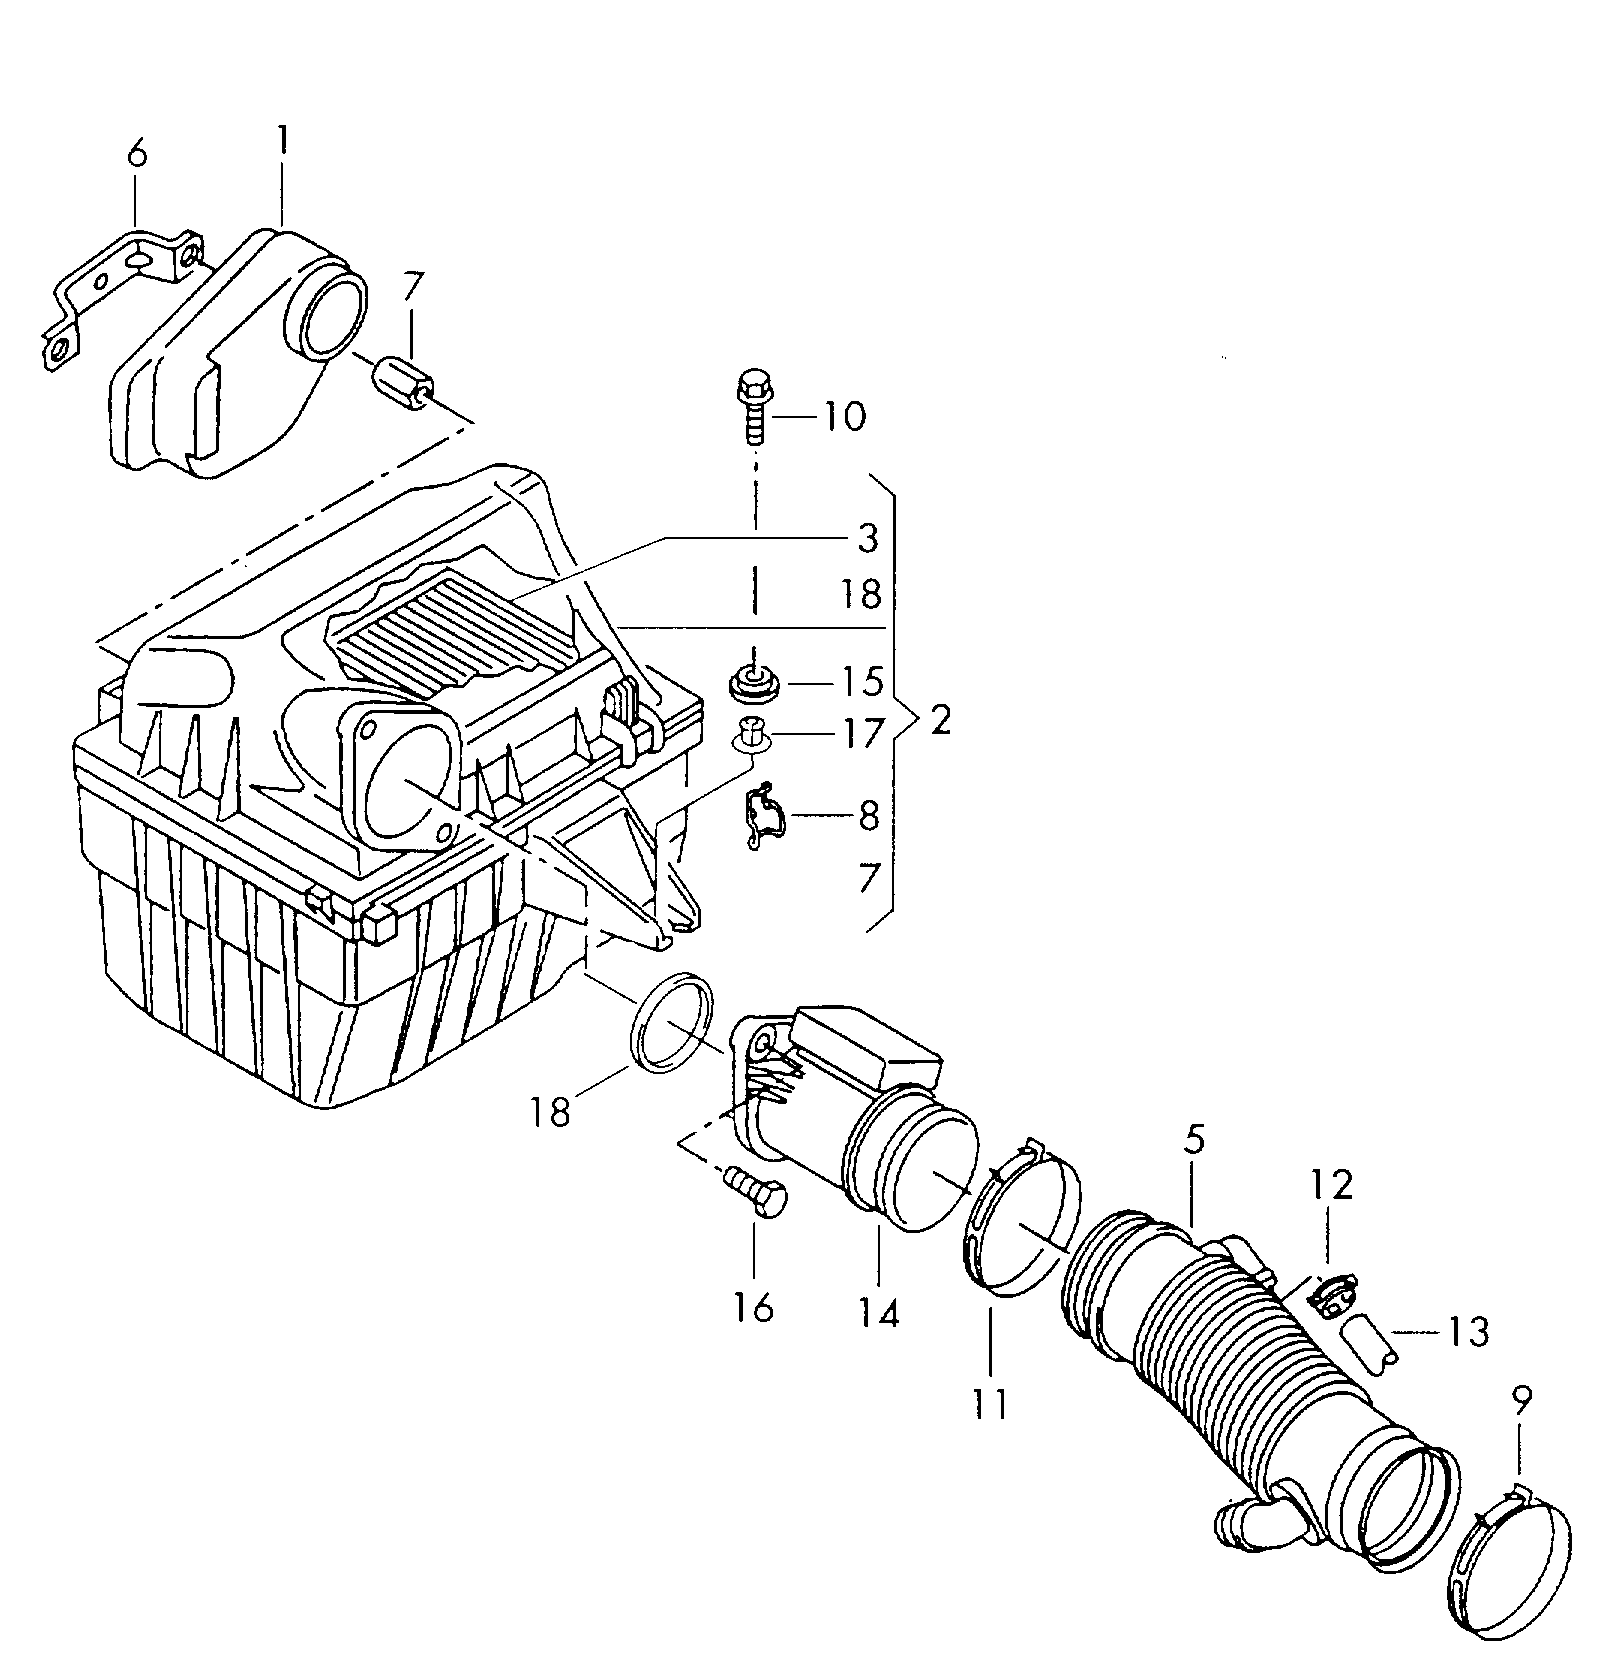 Air filter with connecting<br>parts 2.5Ltr. - Transporter syncro - trsy